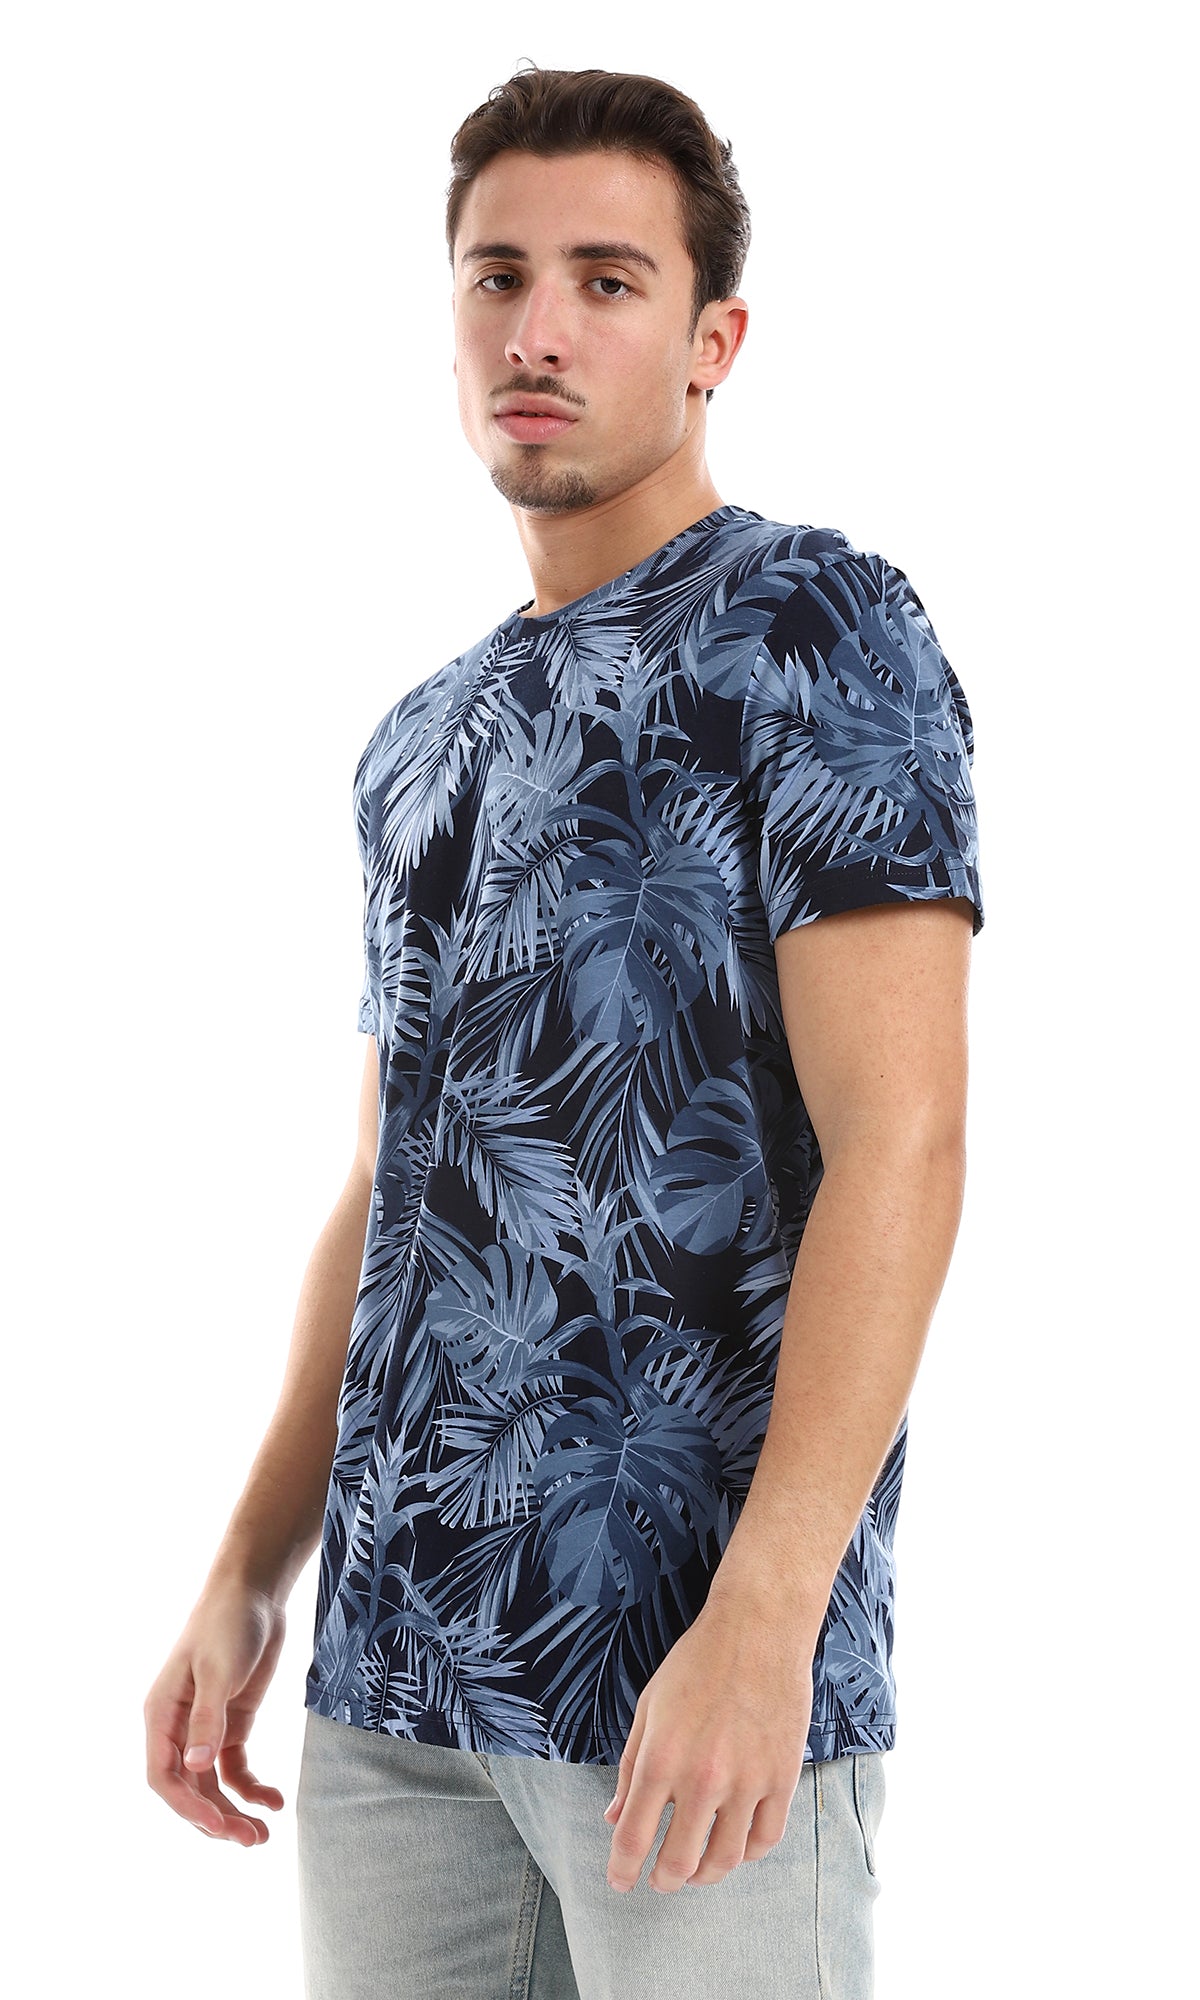 O164745 Navy Blue & Blue Leaves Patterned Tee